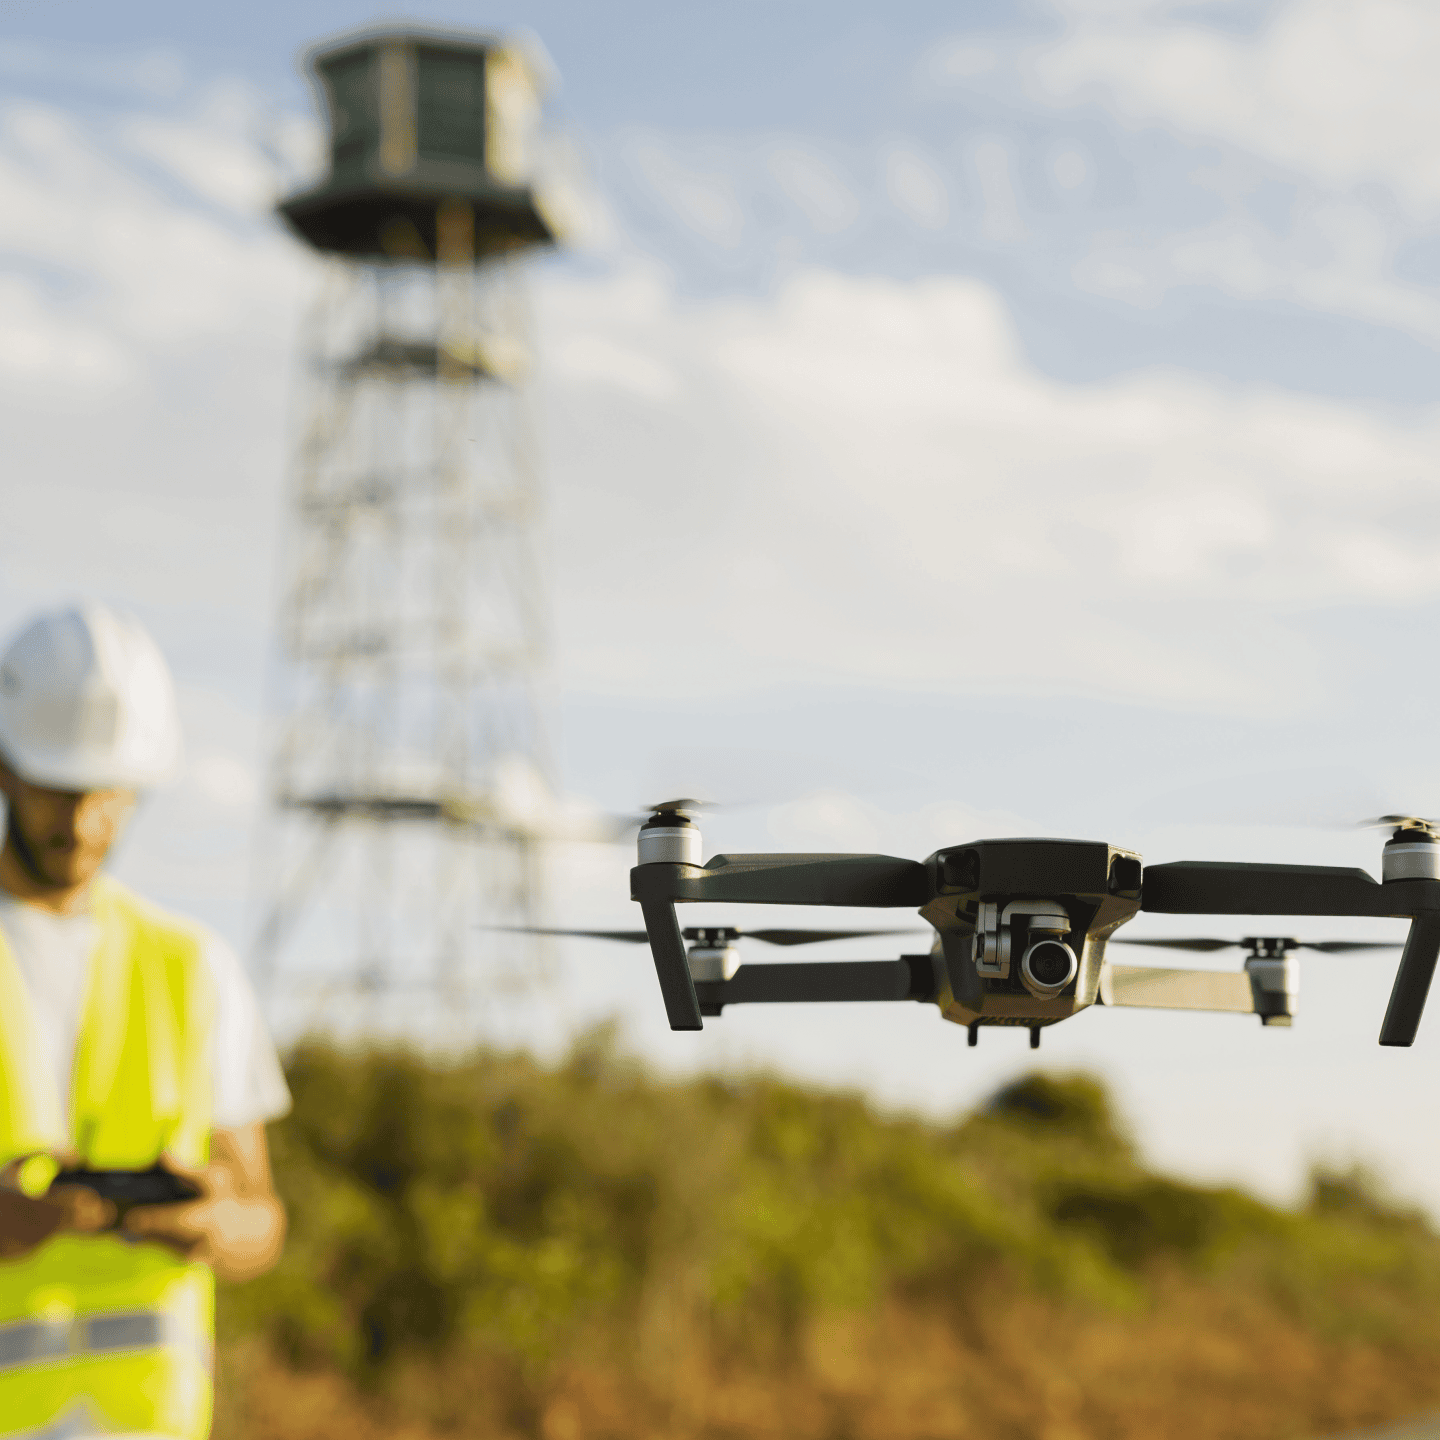 Protecting your UAVs